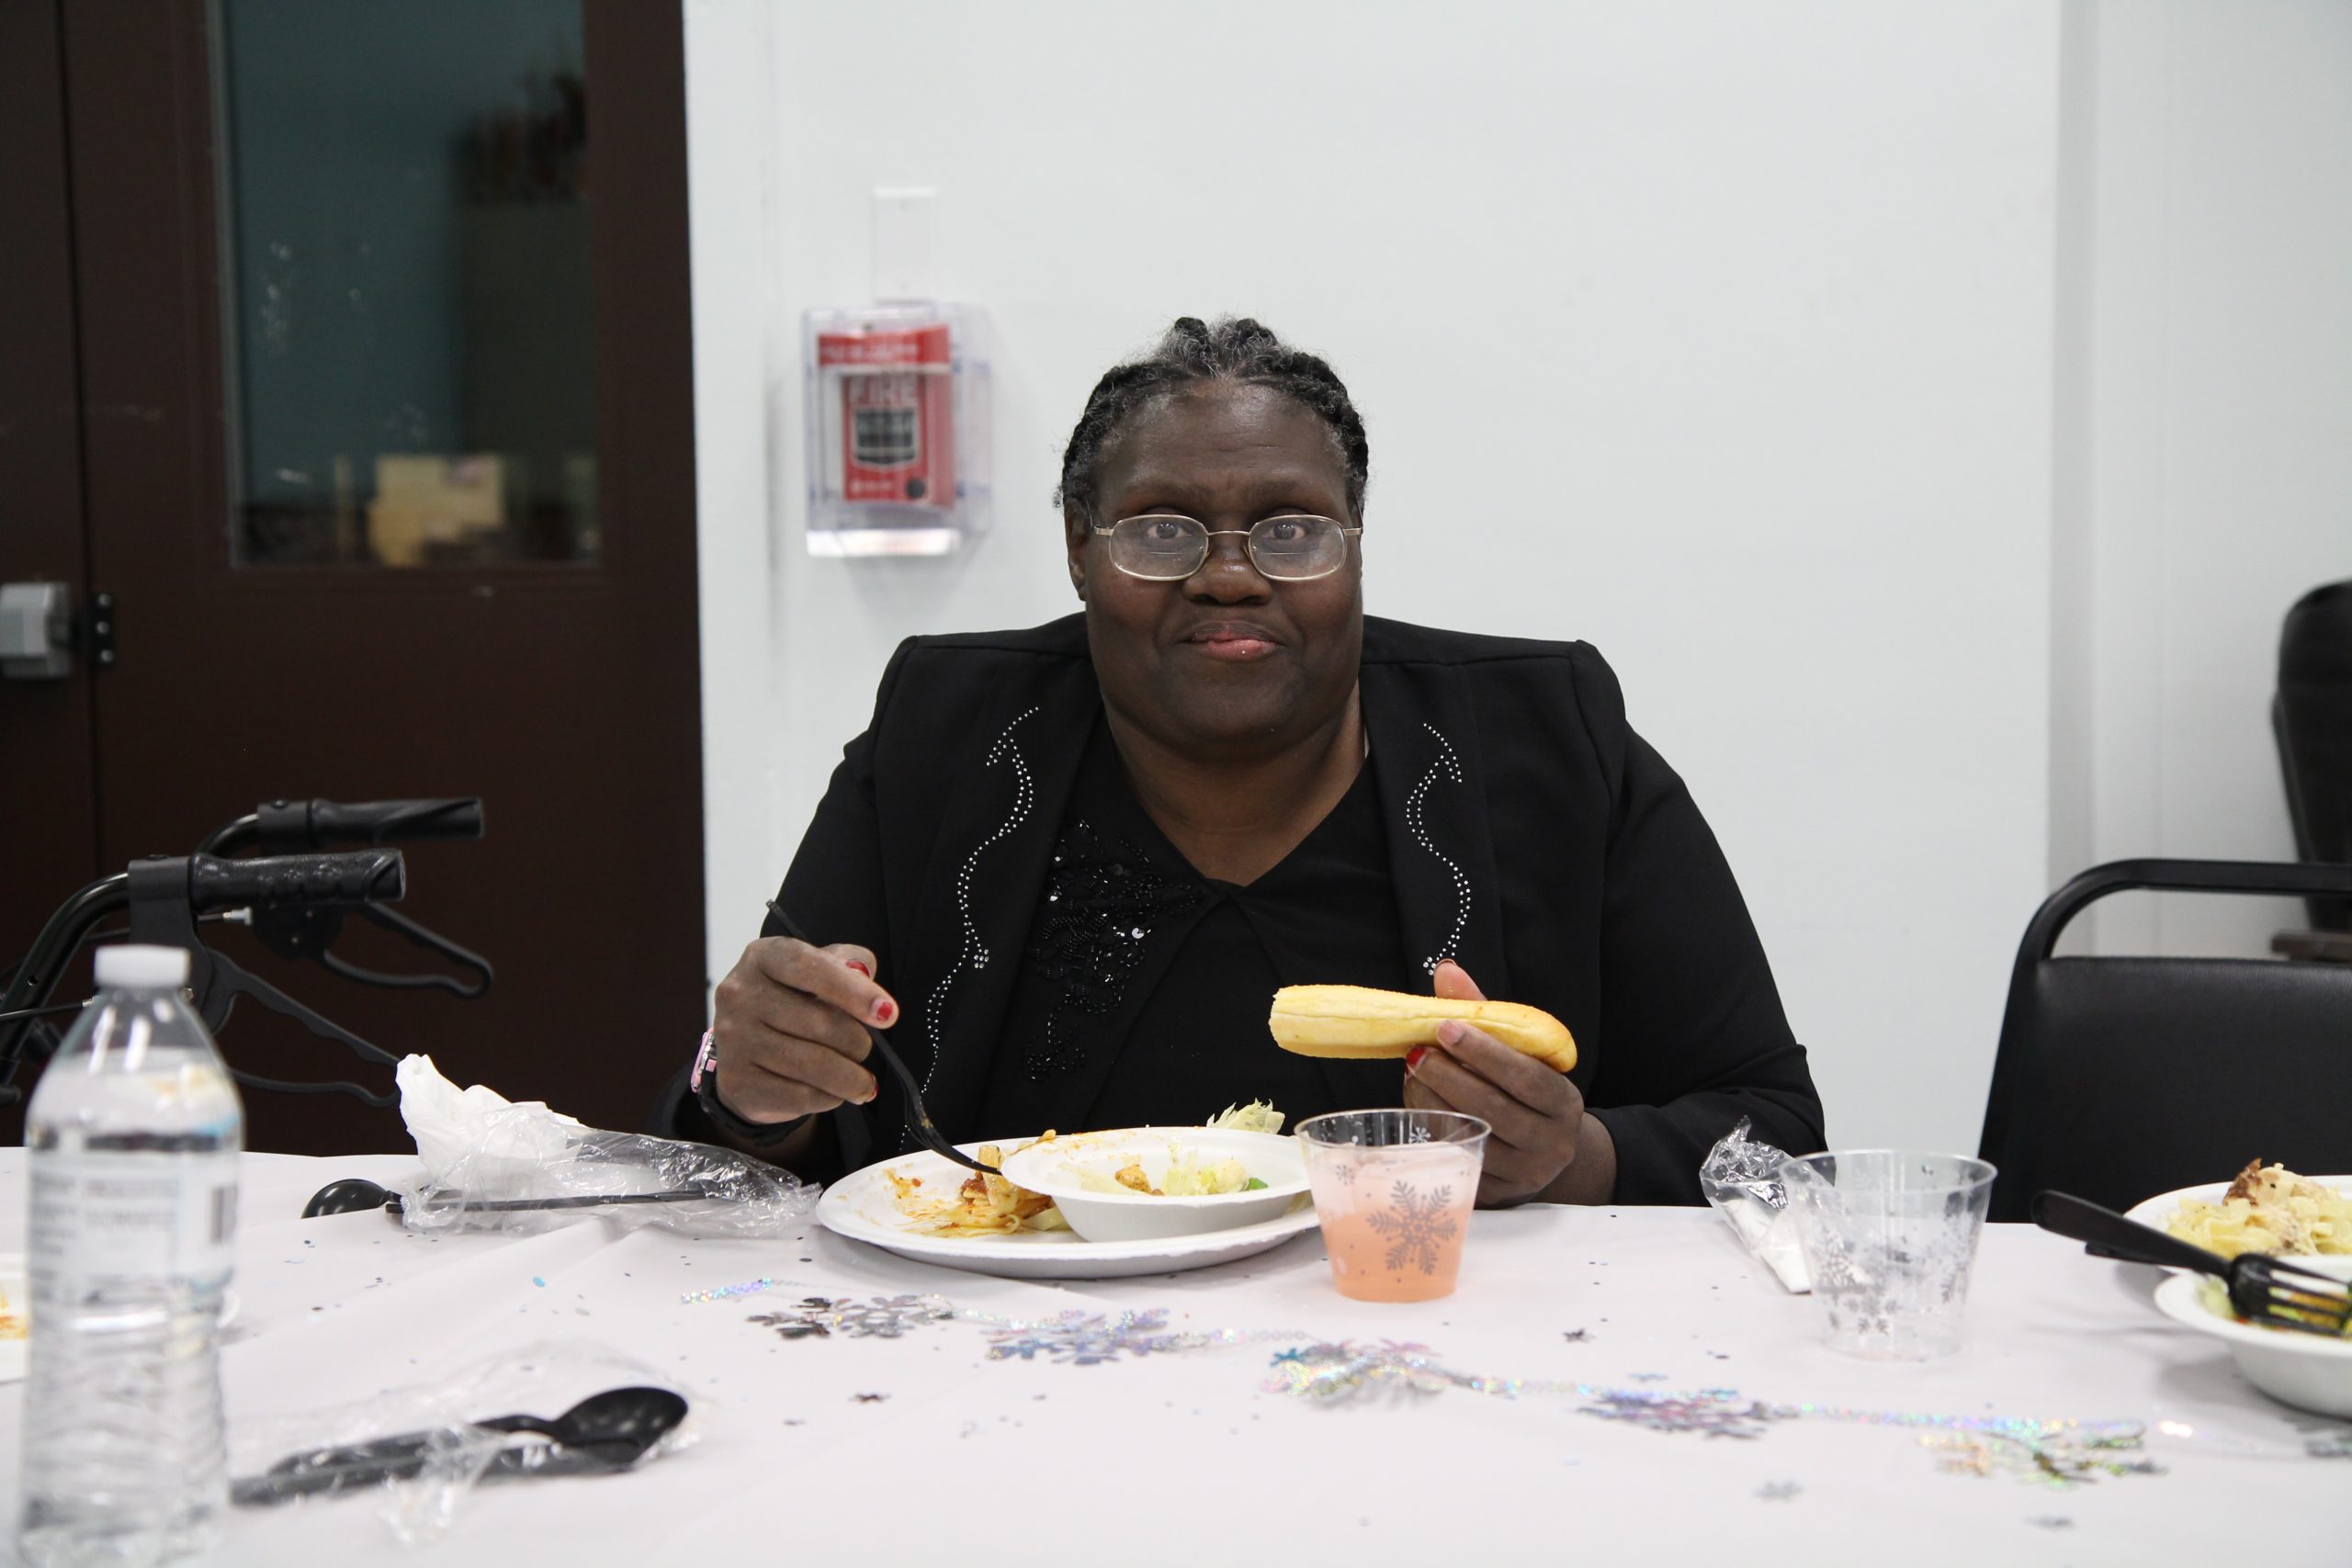 A person dressed up eating a meal.